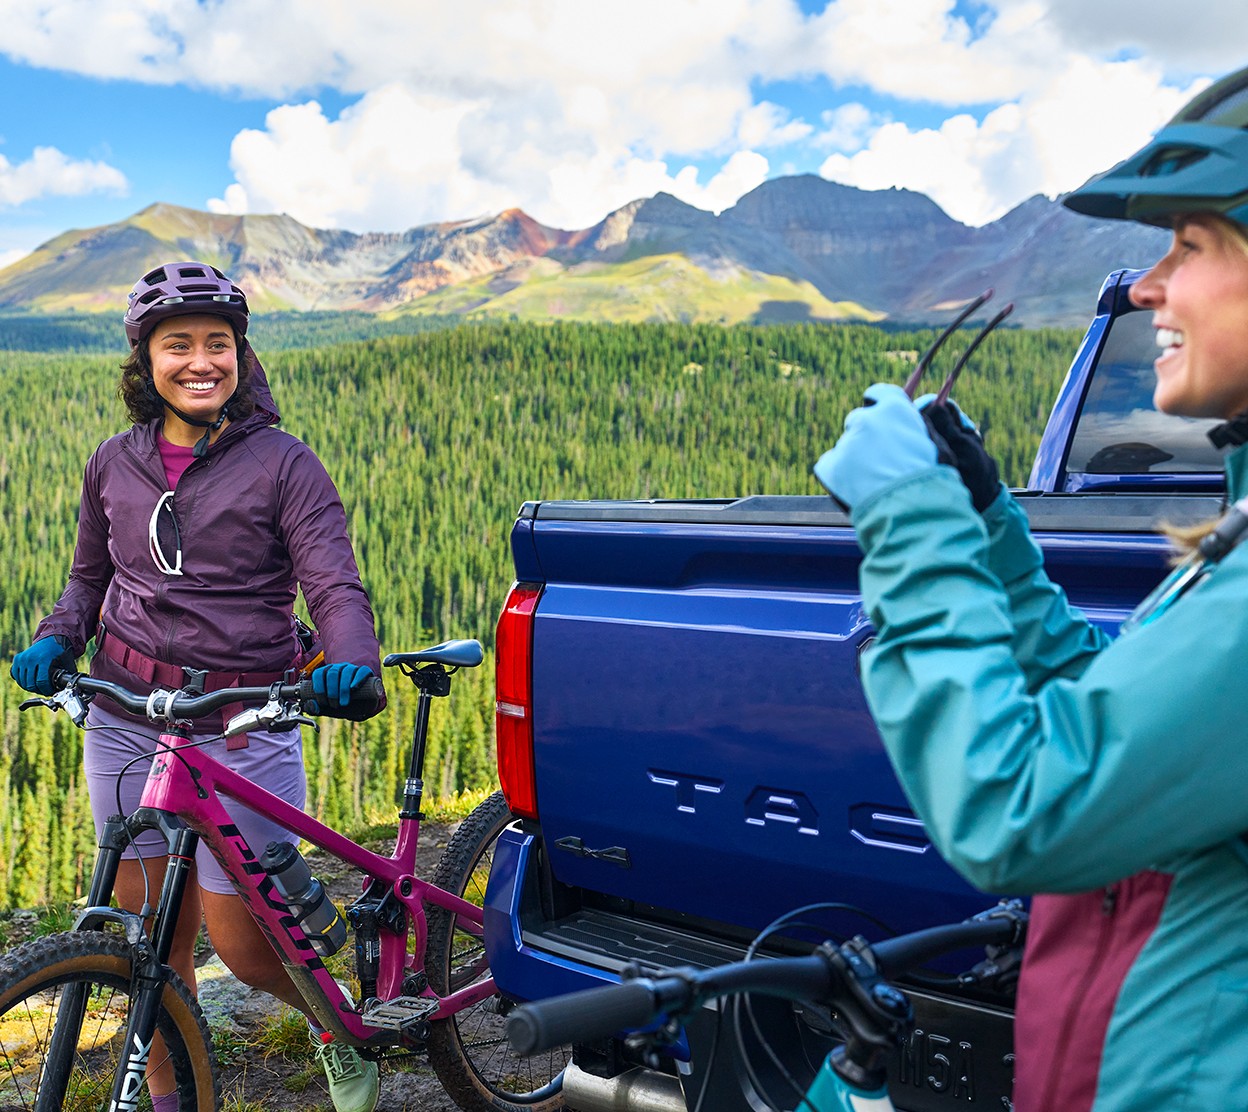 In a scenic landscape, two woman with bikes wearing biking gear hang out together at the back of their Toyota truck preparing for a mountain biking adventure.